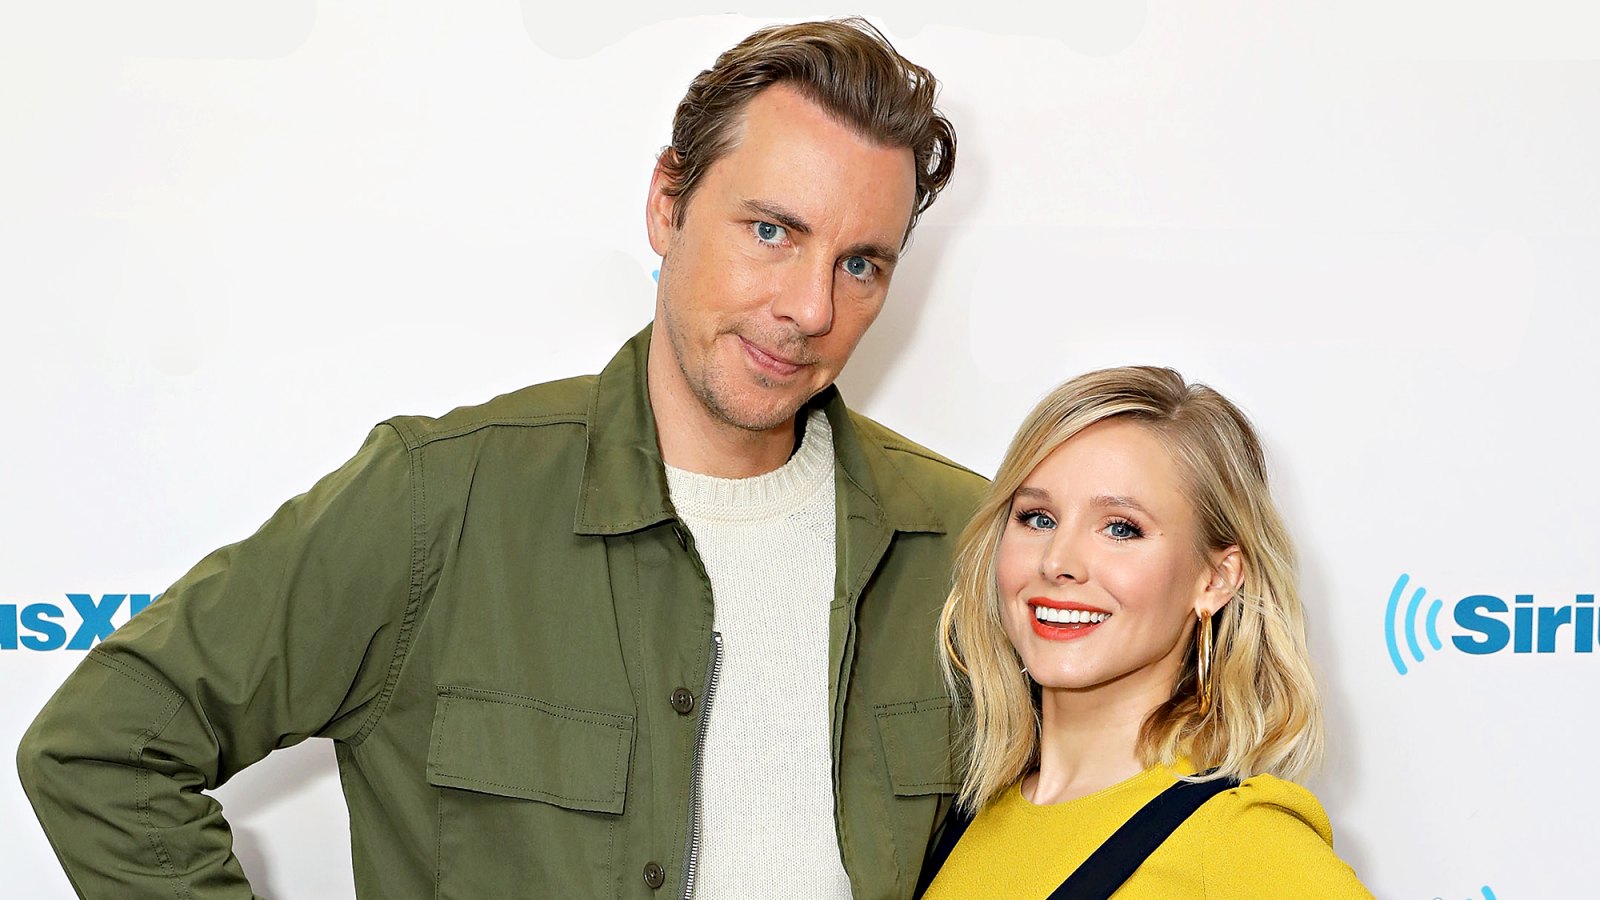 Dax Shepard and Kristen Bell visit the SiriusXM Studios on March 22, 2017 in New York City.